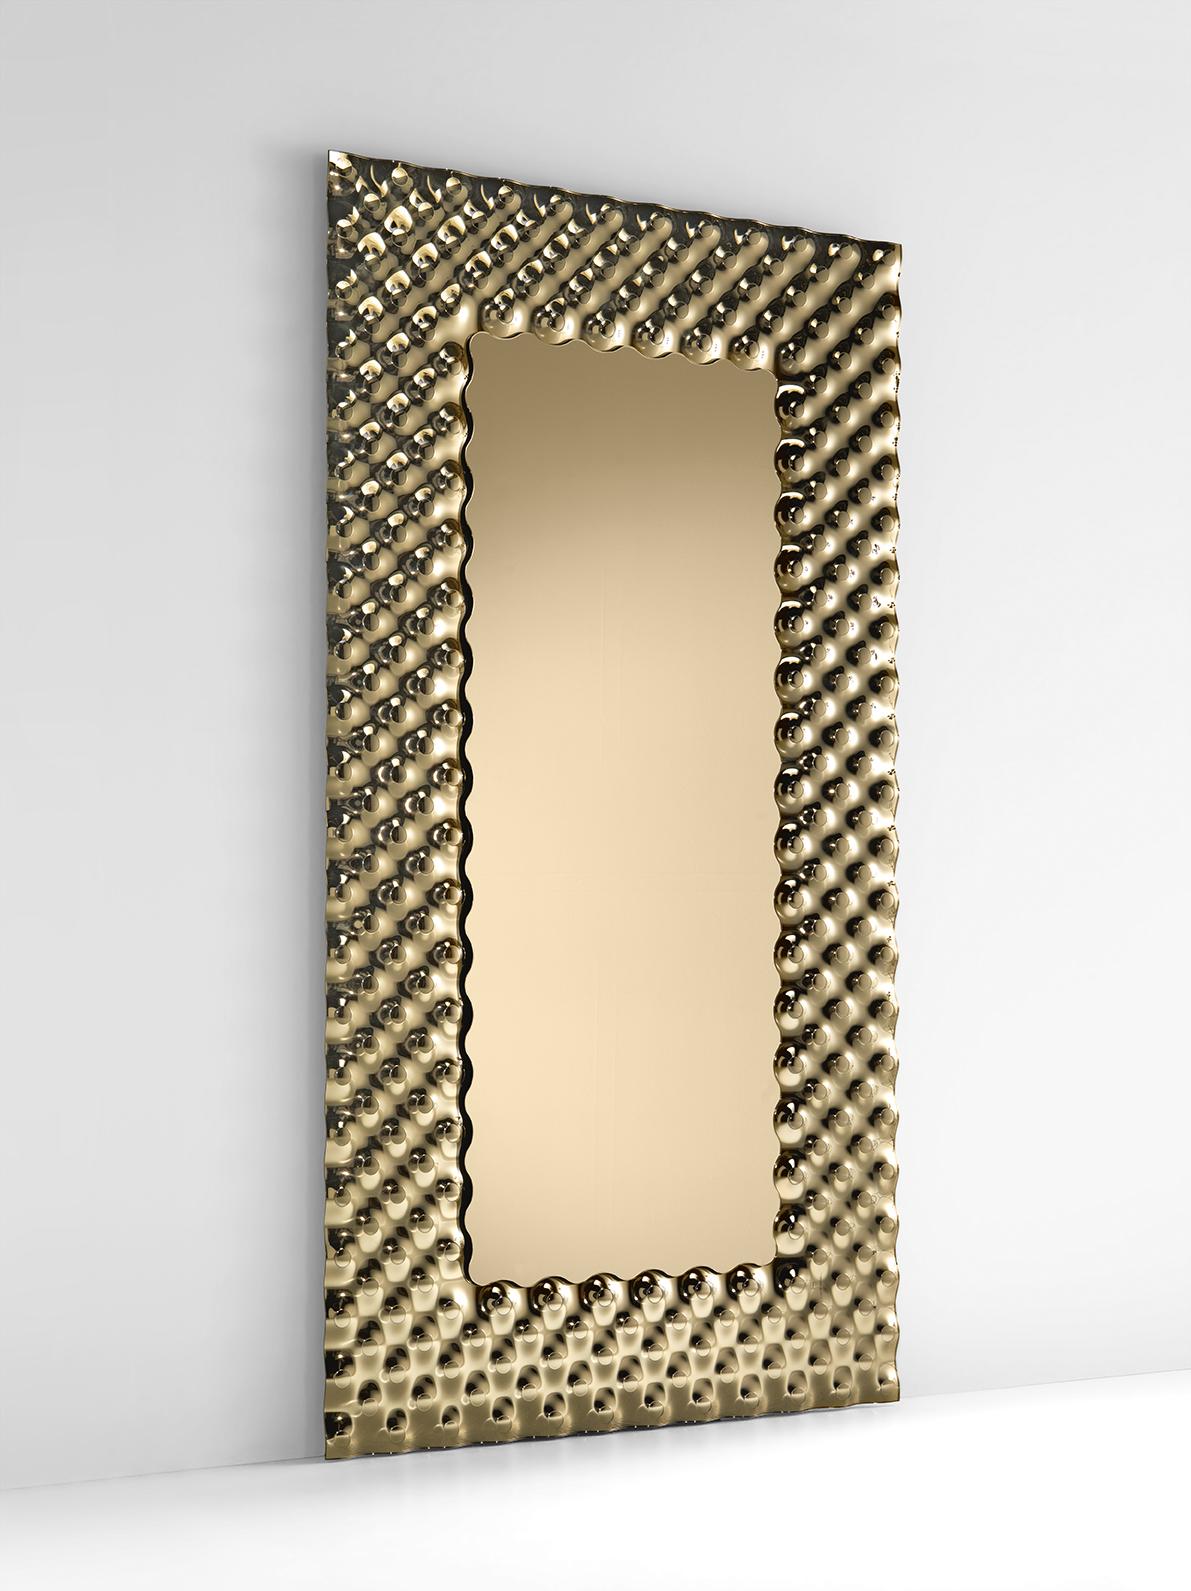 Contemporary Fiam Italia Pop Round Wall Mirror by Marcel Wanders For Sale